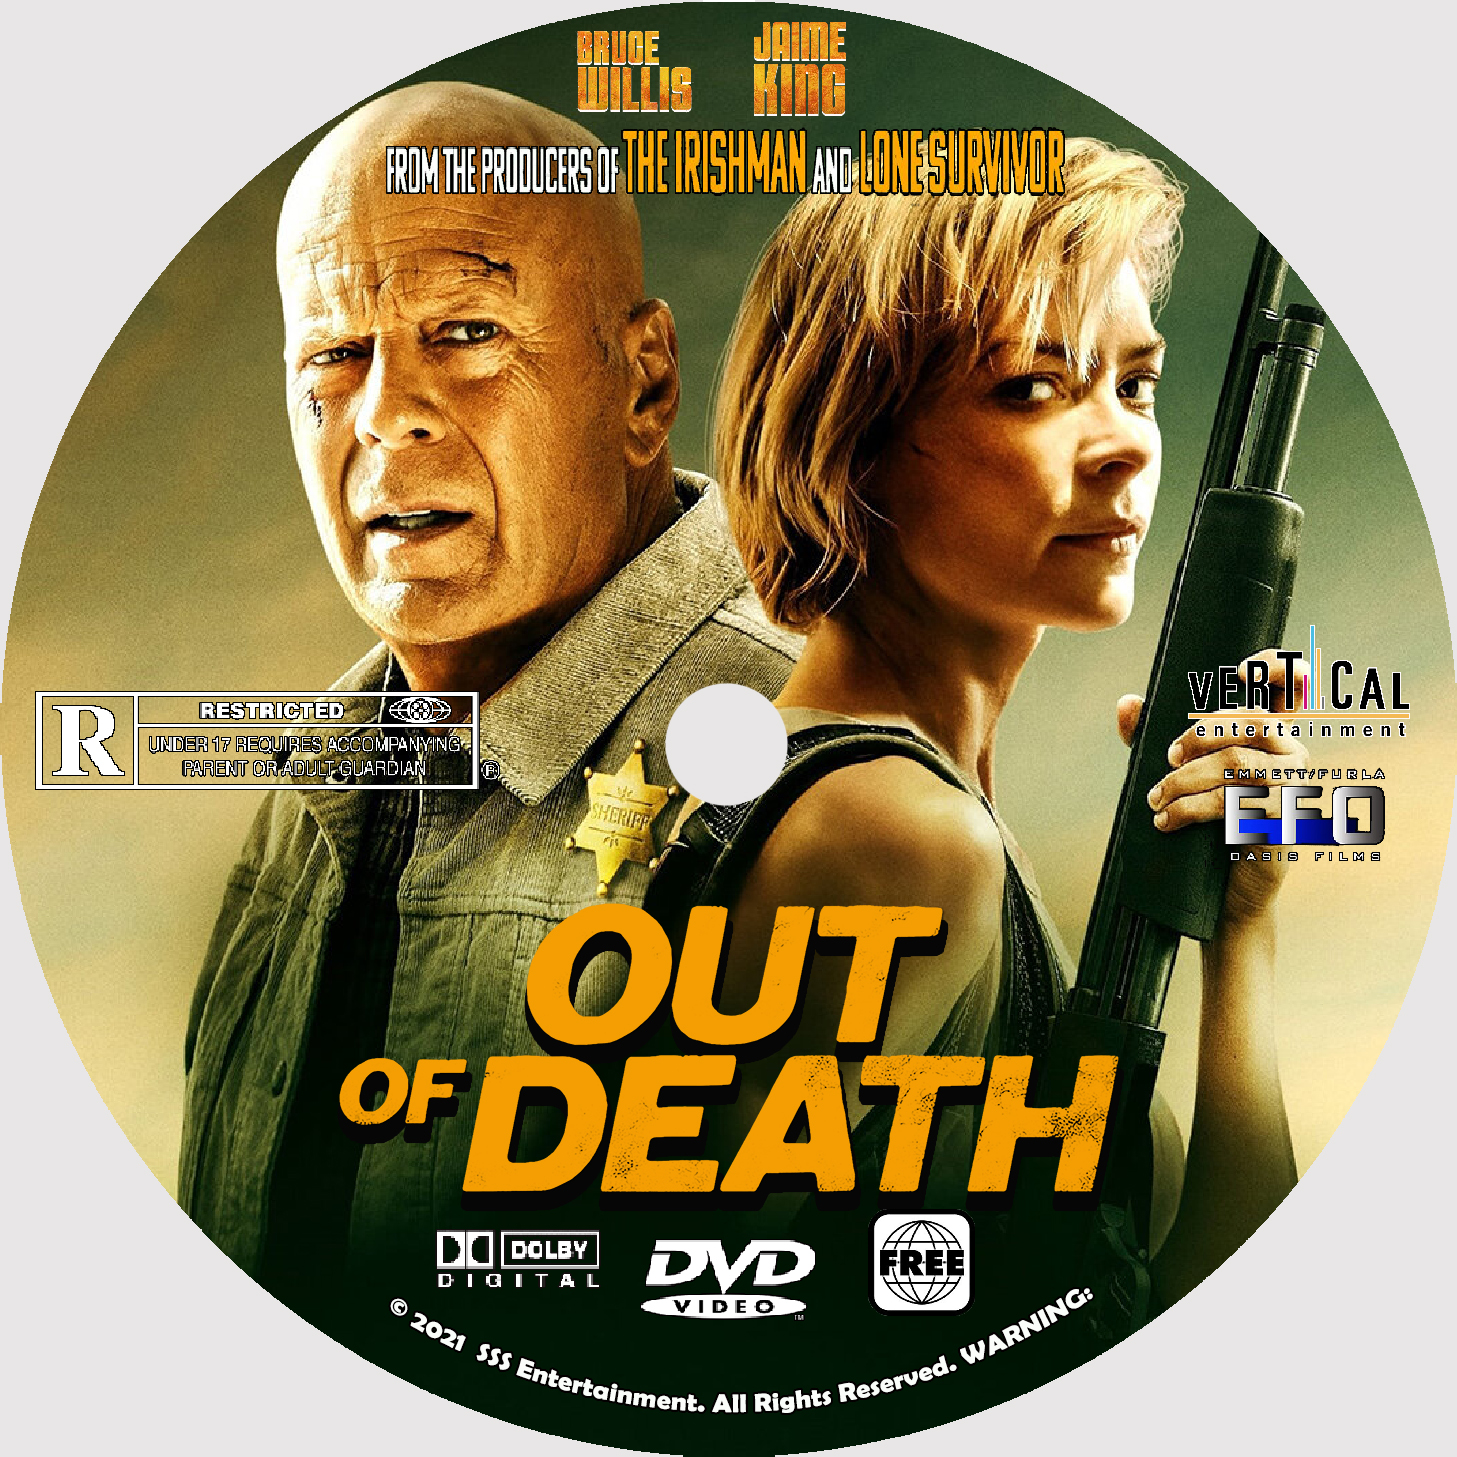 Bite out of life. Out of Death, 2021 DVD Covers. DVD 2021. Вспышка 2021 DVD Cover.